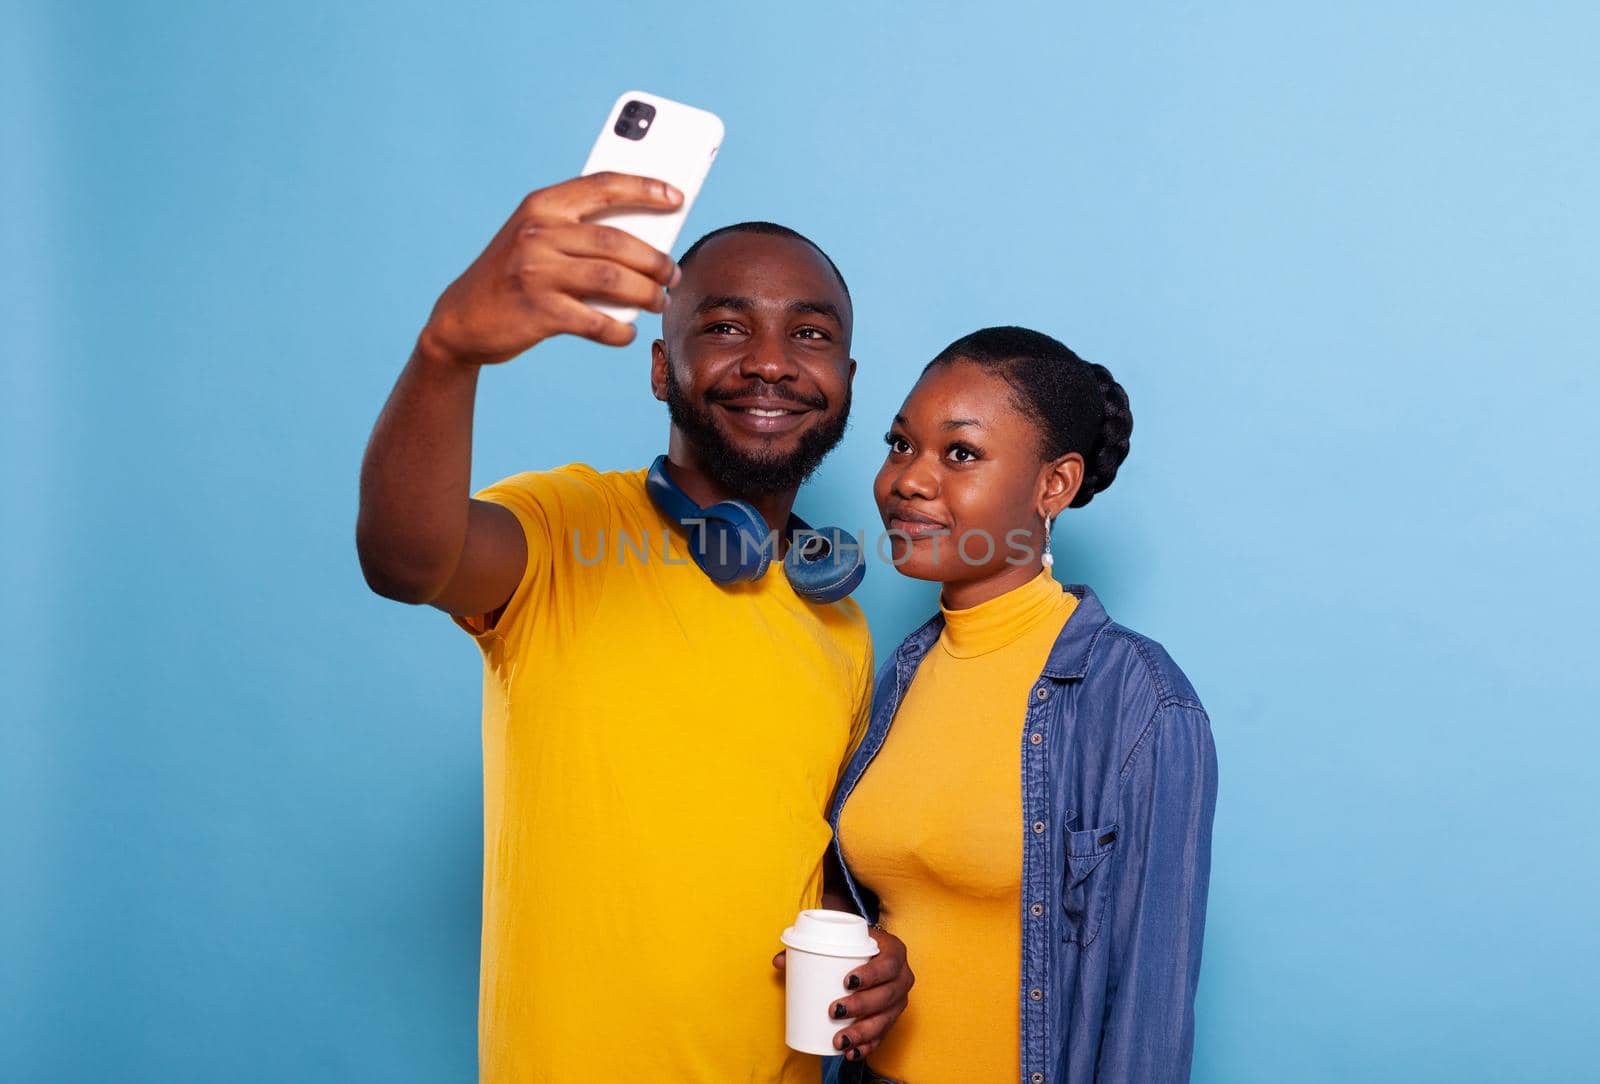 Happy couple taking selfies on smartphone in studio, making memories together. Modern boyfriend and girlfriend taking pictures on mobile phone, embracing and using technology over background.